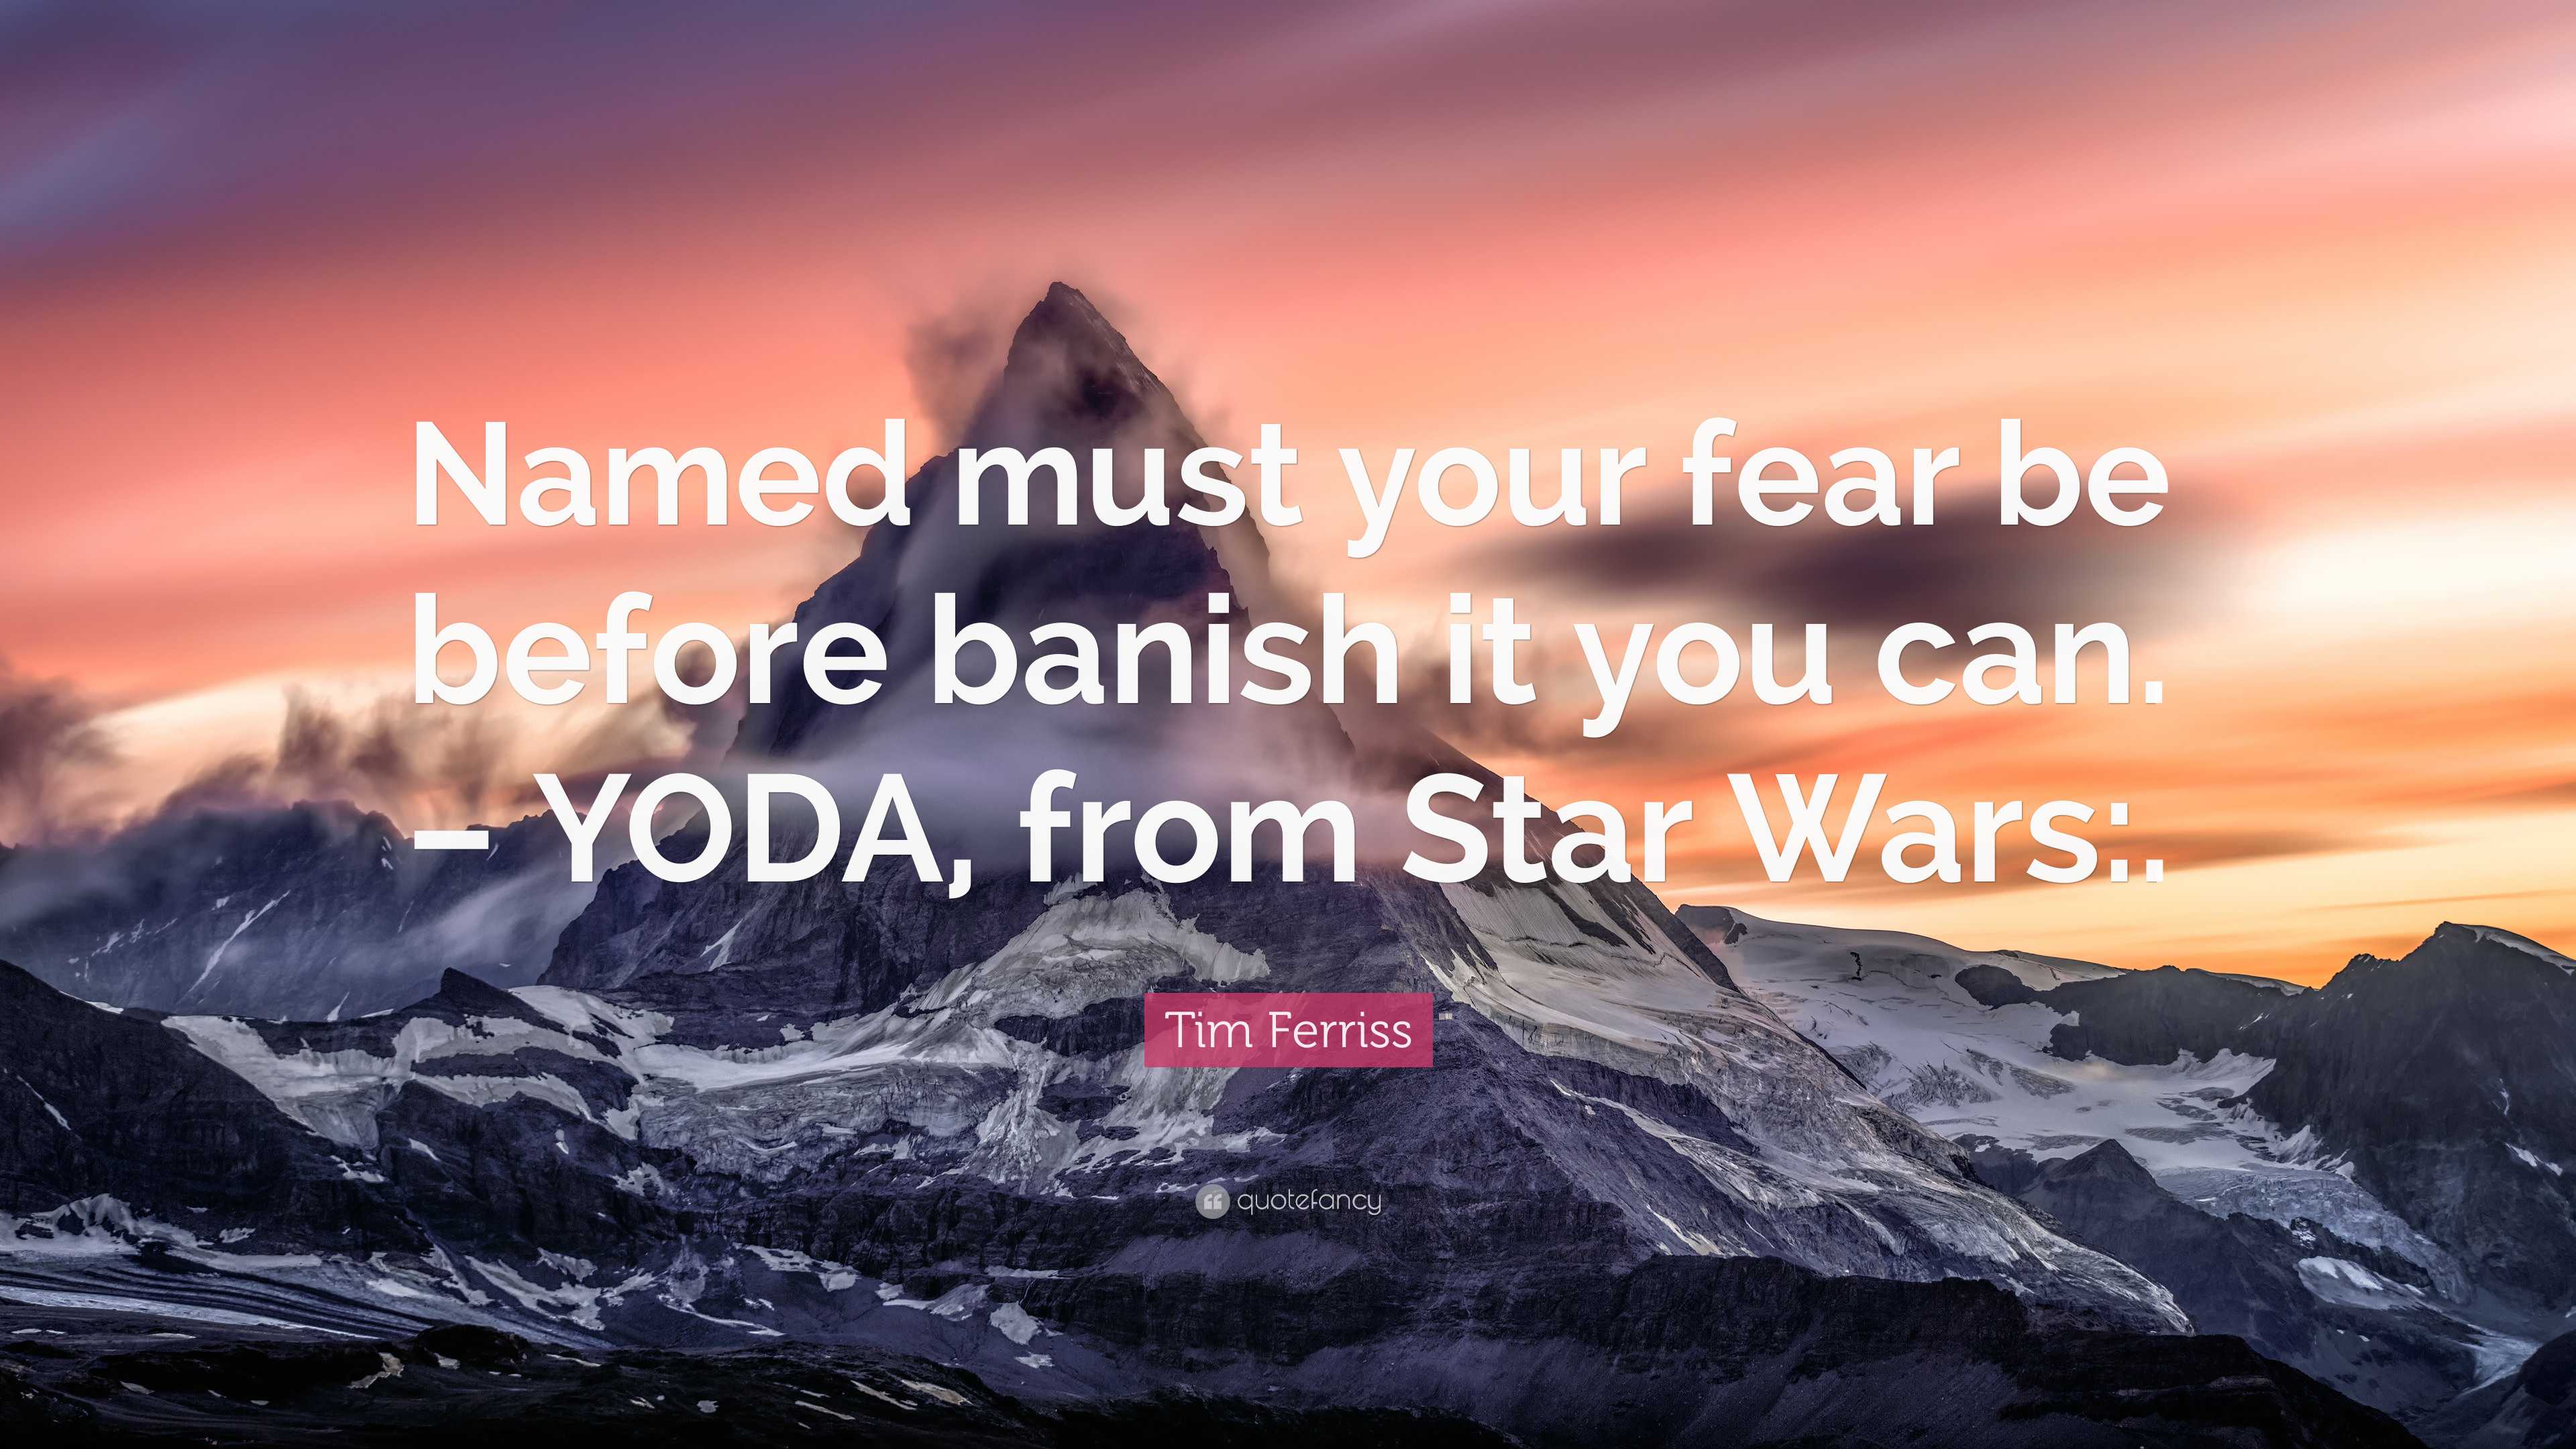 Banish Your Fears!